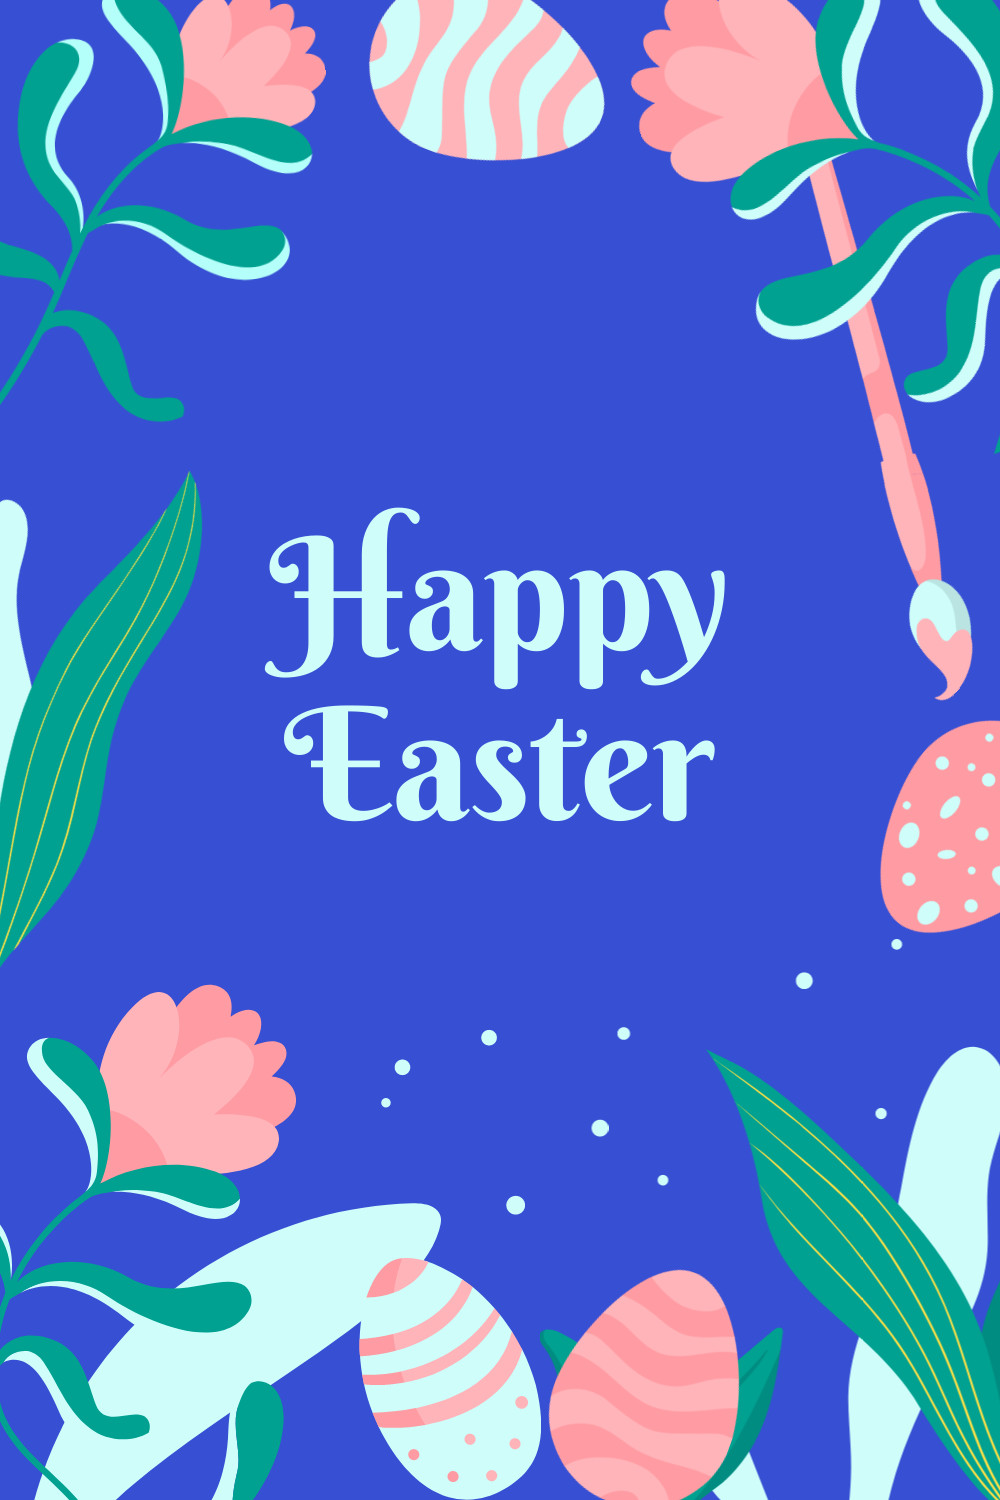 Happy Easter Flowers and Eggs Facebook Cover 820x360